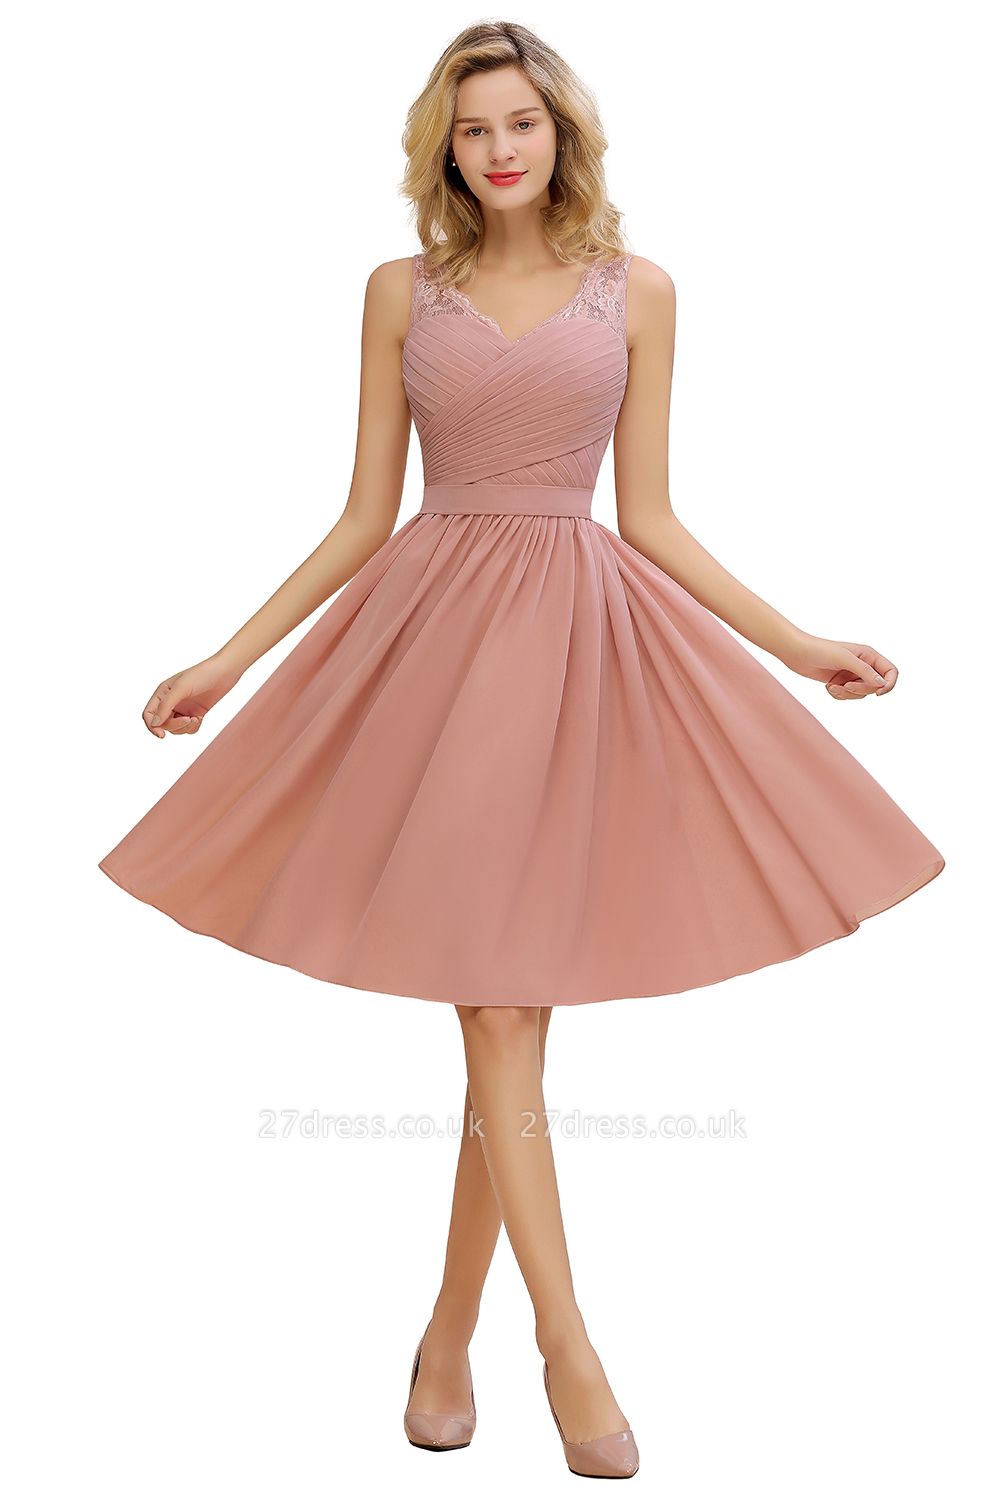 Lace Short Homecoming Dresses with Belt |  Sleeveless  Pink Cheap Party Dress UK